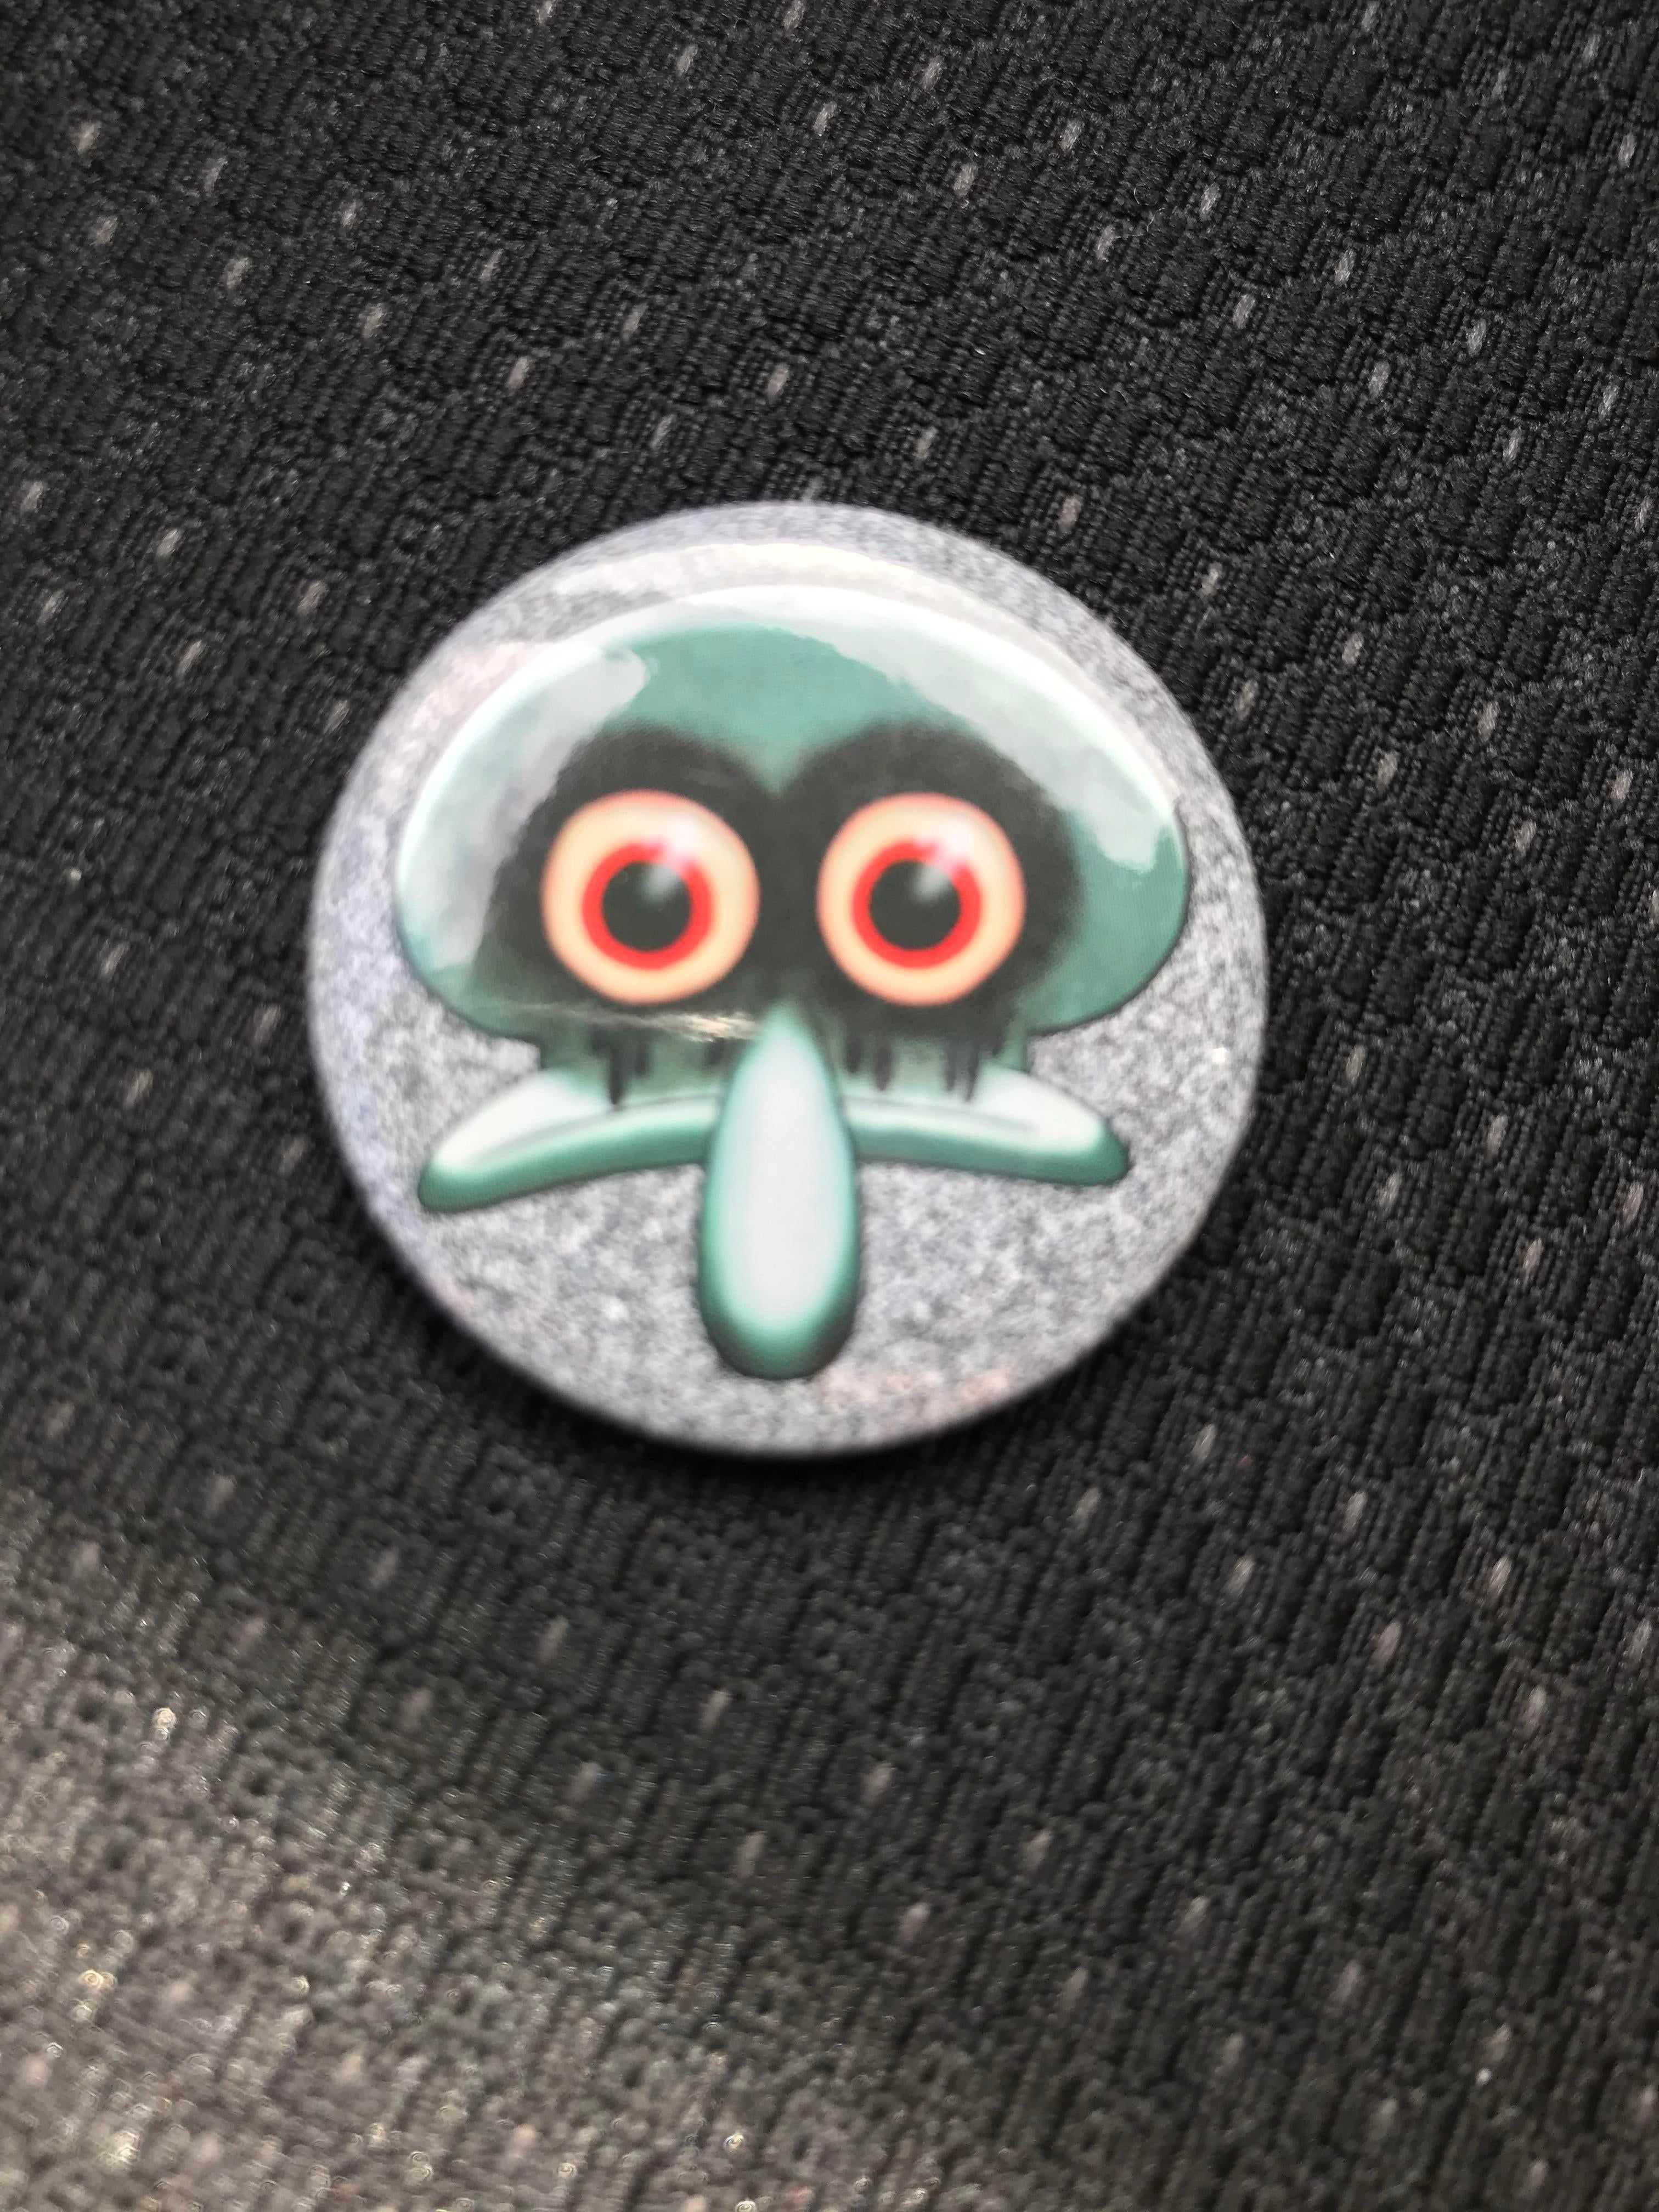 Hot Topic has a Red Mist Squidward pin!